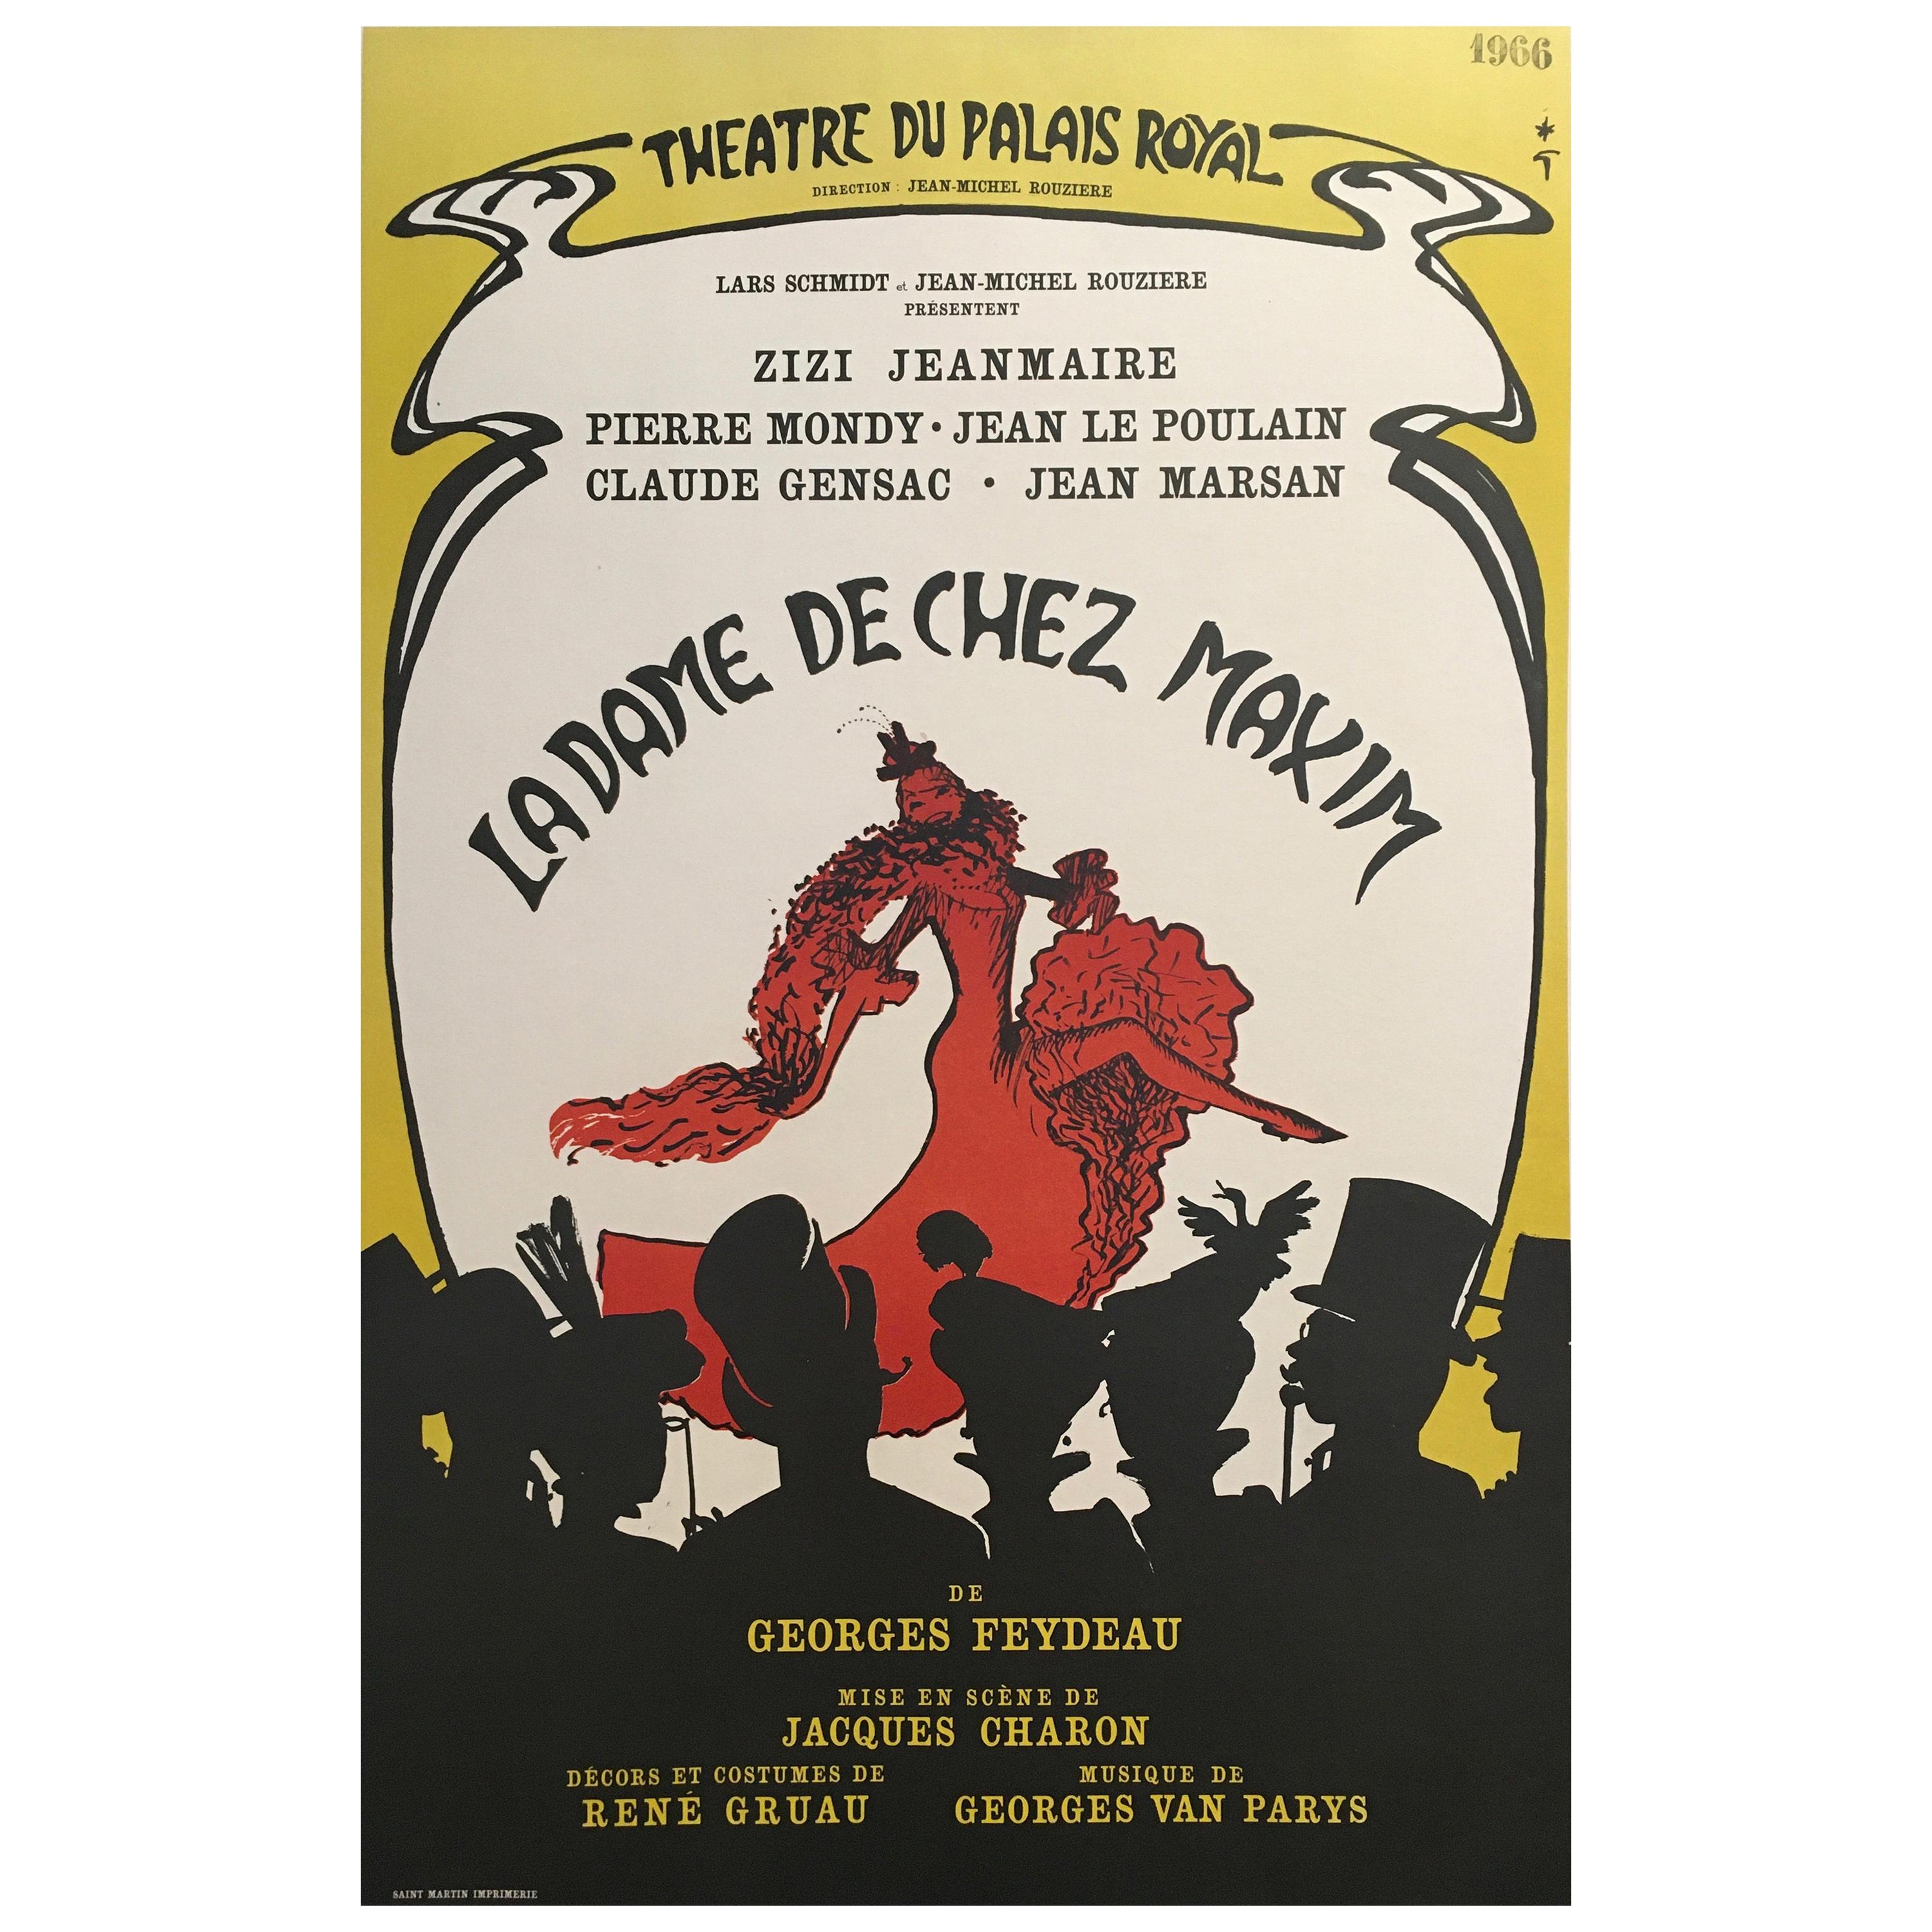 Original Vintage French Theatre and Cabaret Poster by René Gruau, 1966